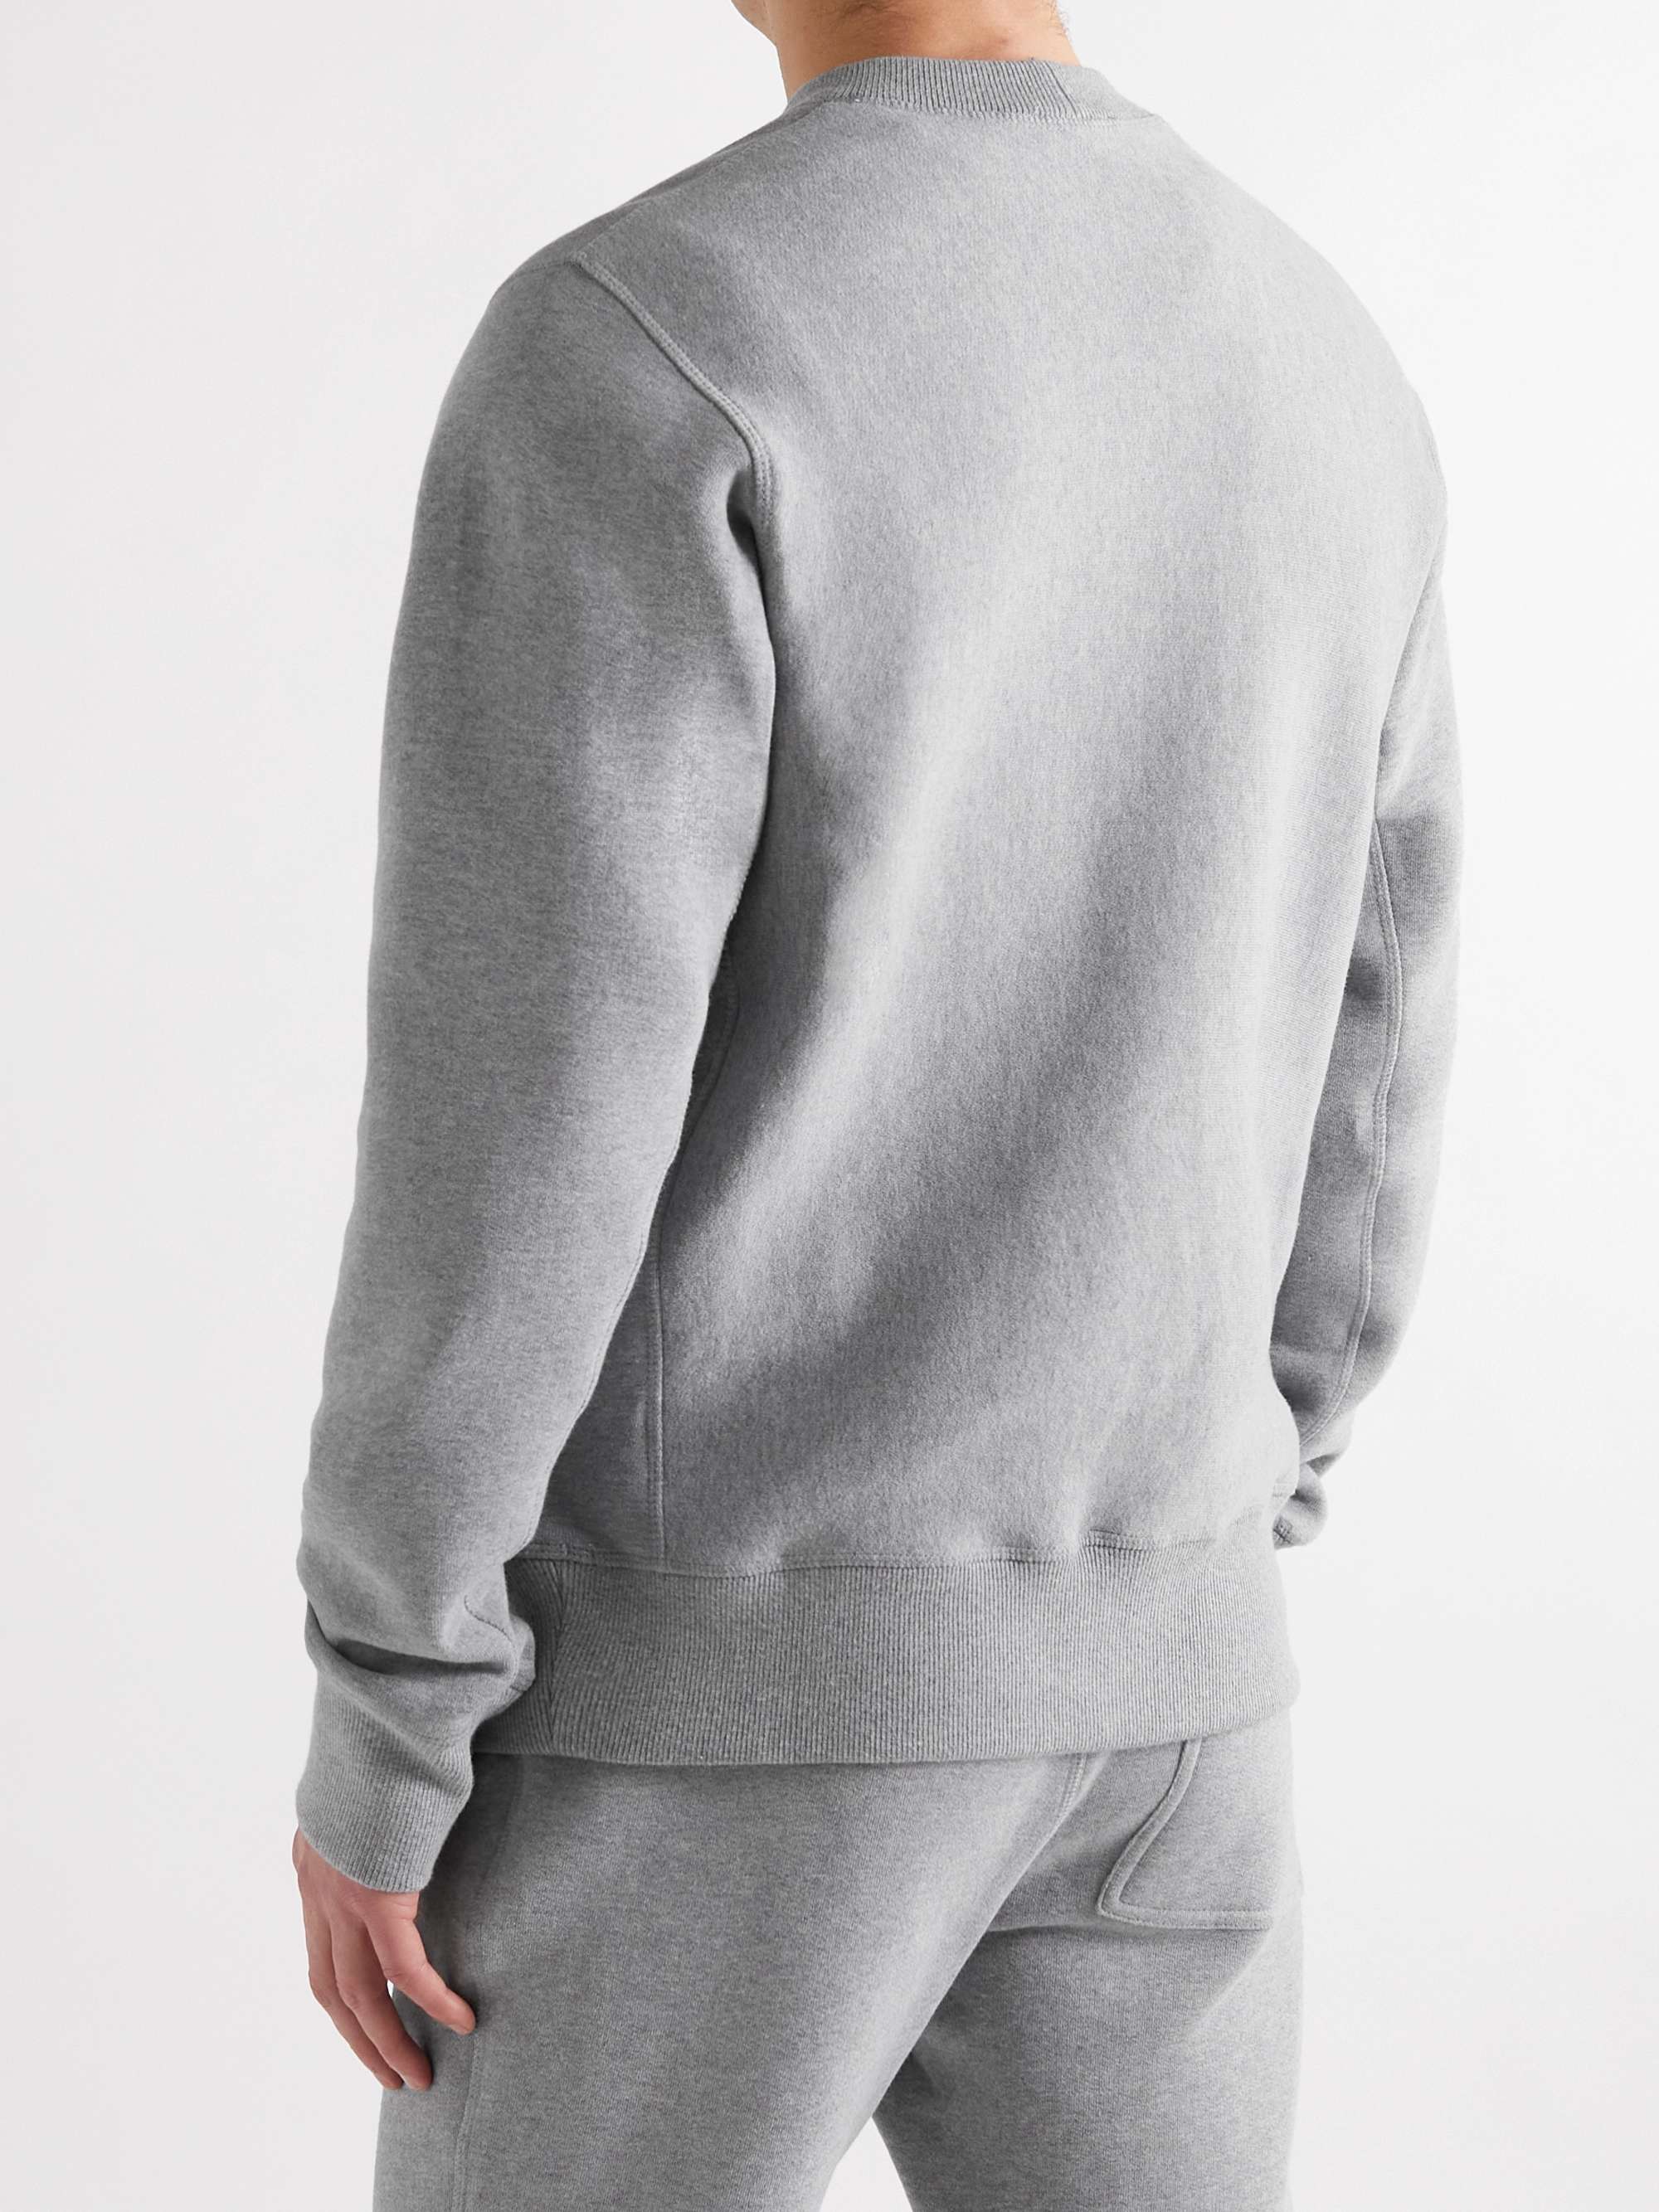 PRIVATE WHITE V.C. Cotton, Wool and Cashmere-Blend Jersey Sweatshirt